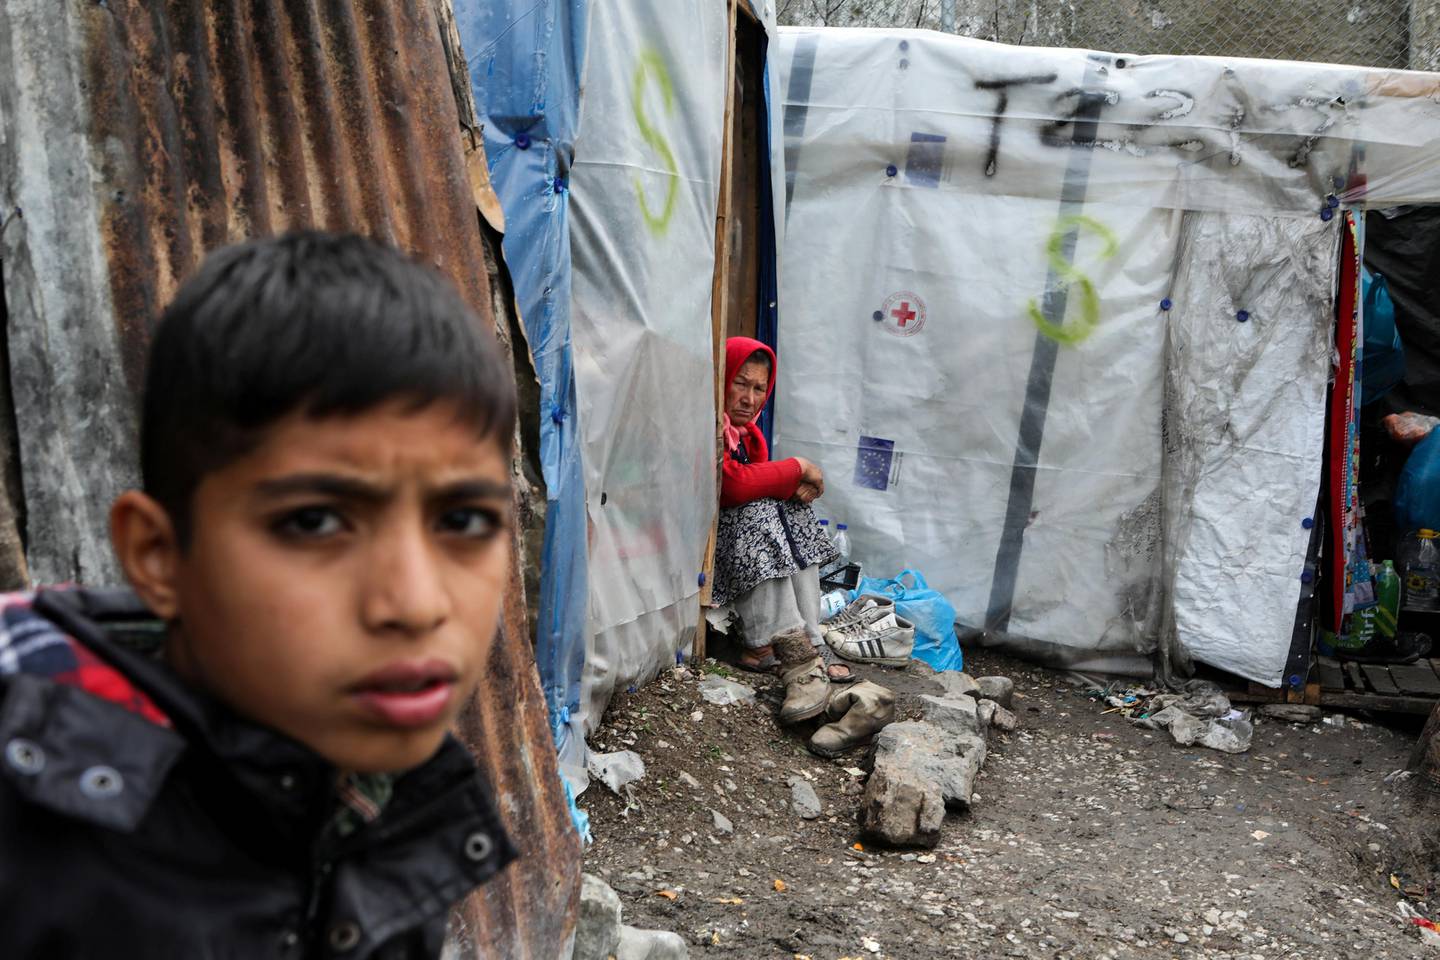 FILE PHOTO: Migrants stand outside a temporary shelter in a makeshift camp for refugees and migrants next to the Moria camp, during a nationwide lockdown to contain the spread of the coronavirus disease (COVID-19), on the island of Lesbos, Greece April 02, 2020. REUTERS/Elias Marcou/File Photo